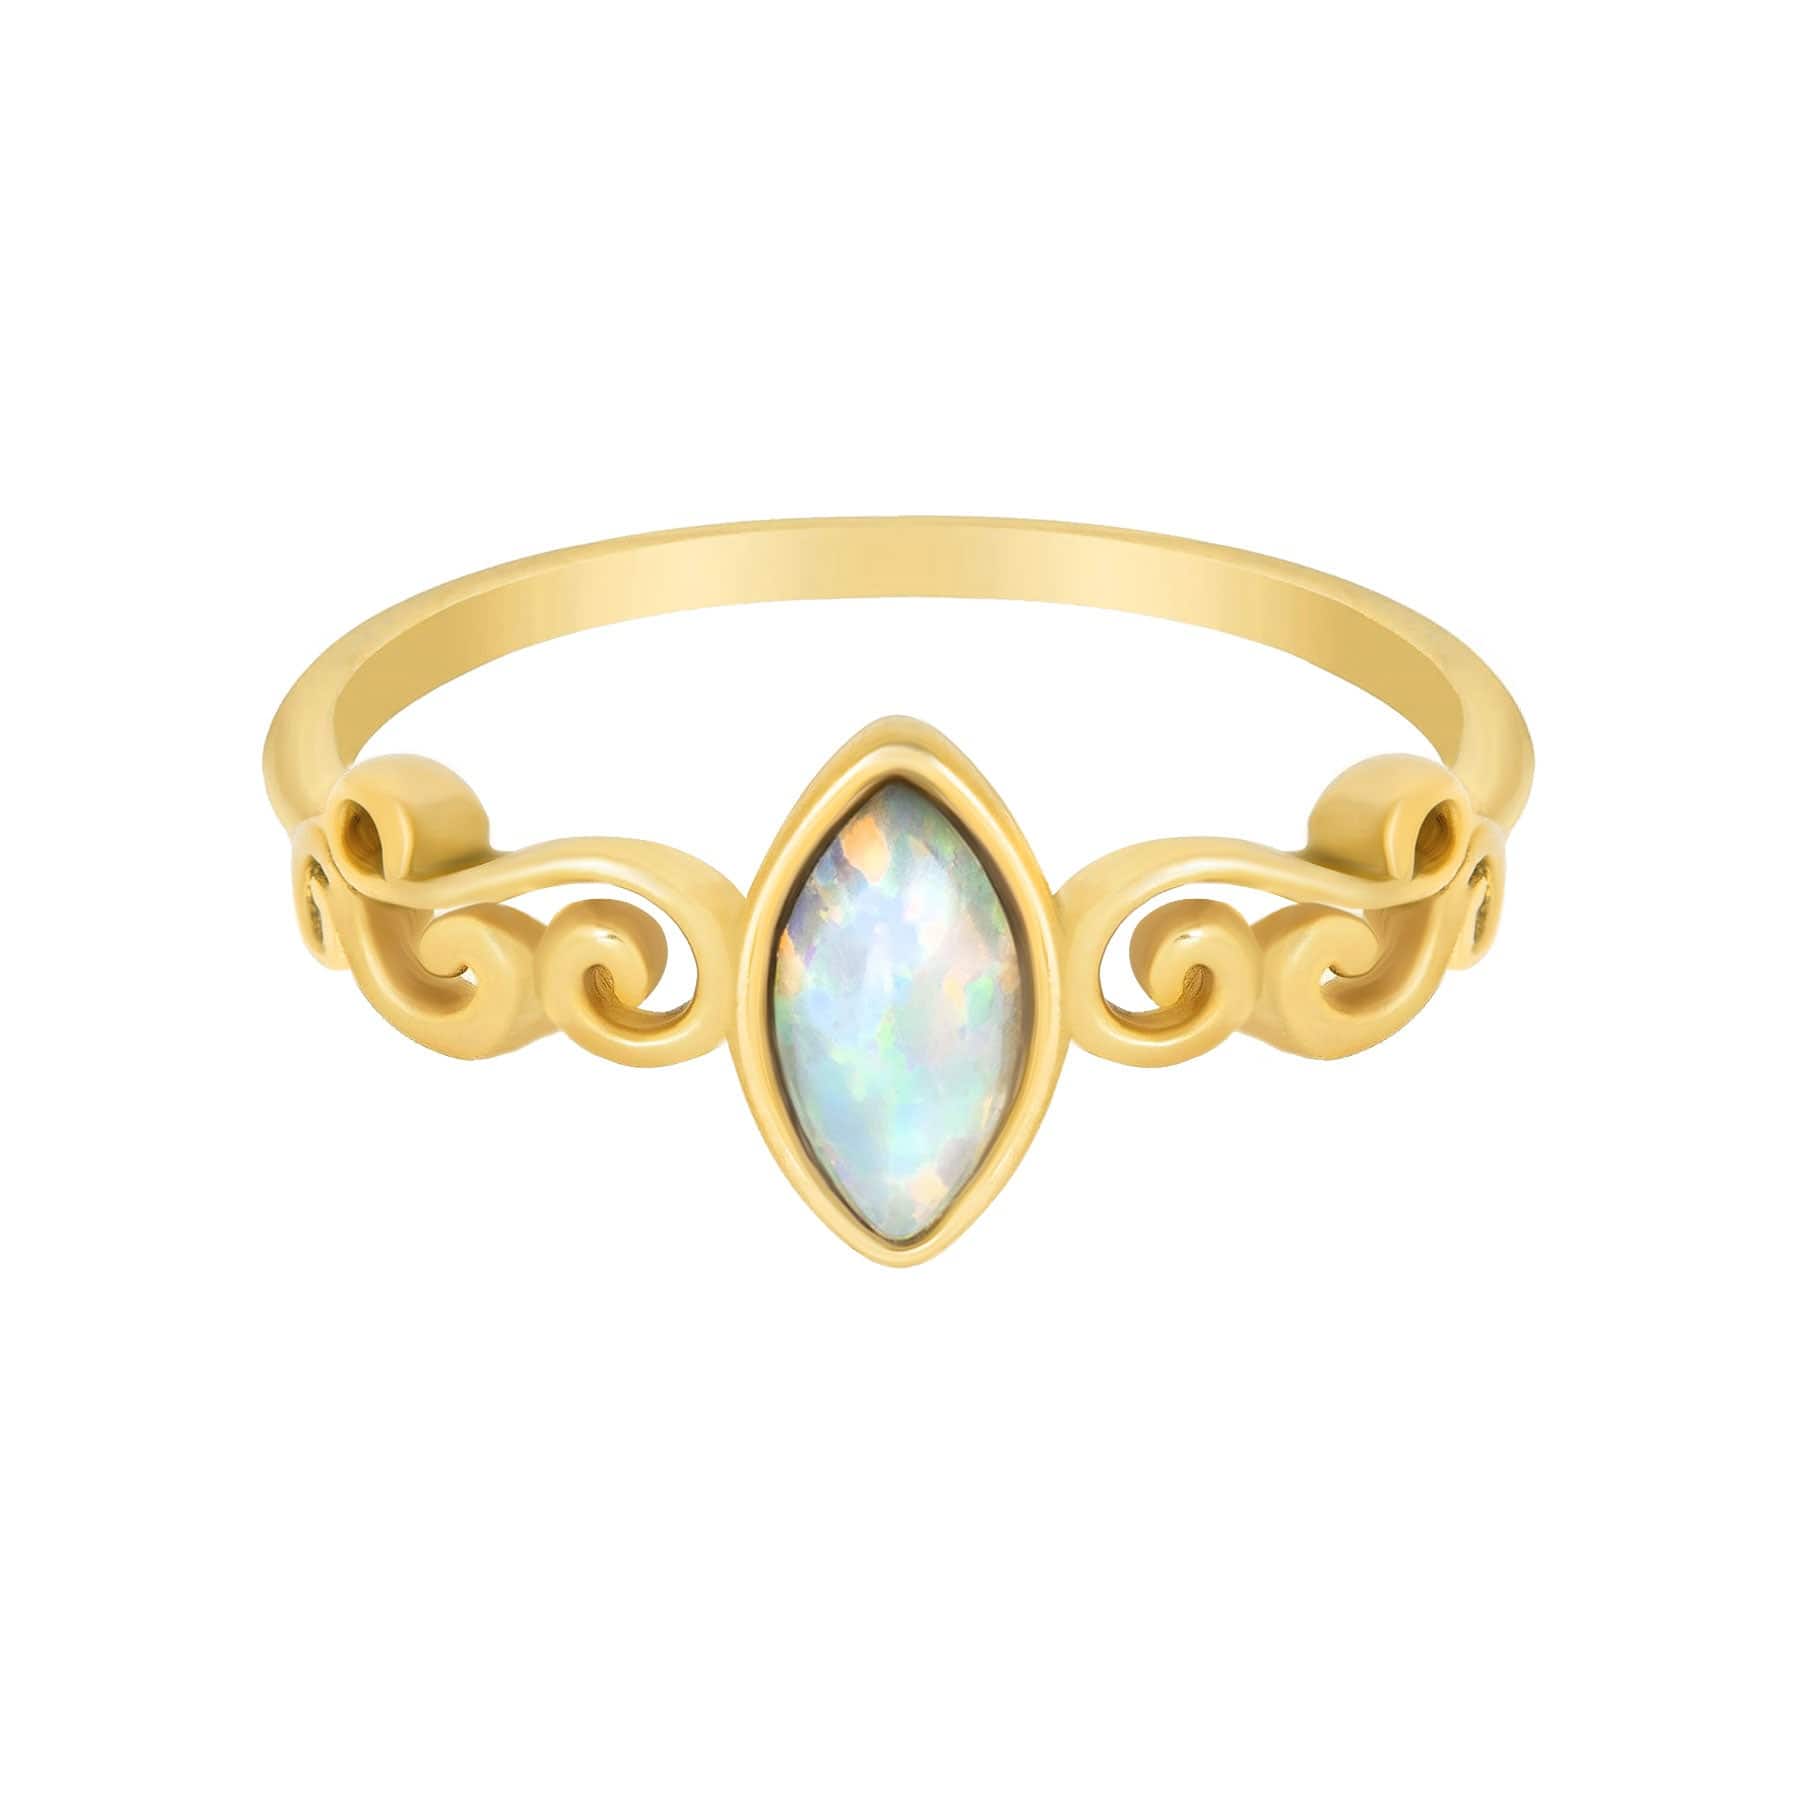 BohoMoon Stainless Steel Elodie Opal Ring Gold / US 6 / UK L / EUR 51 (small)